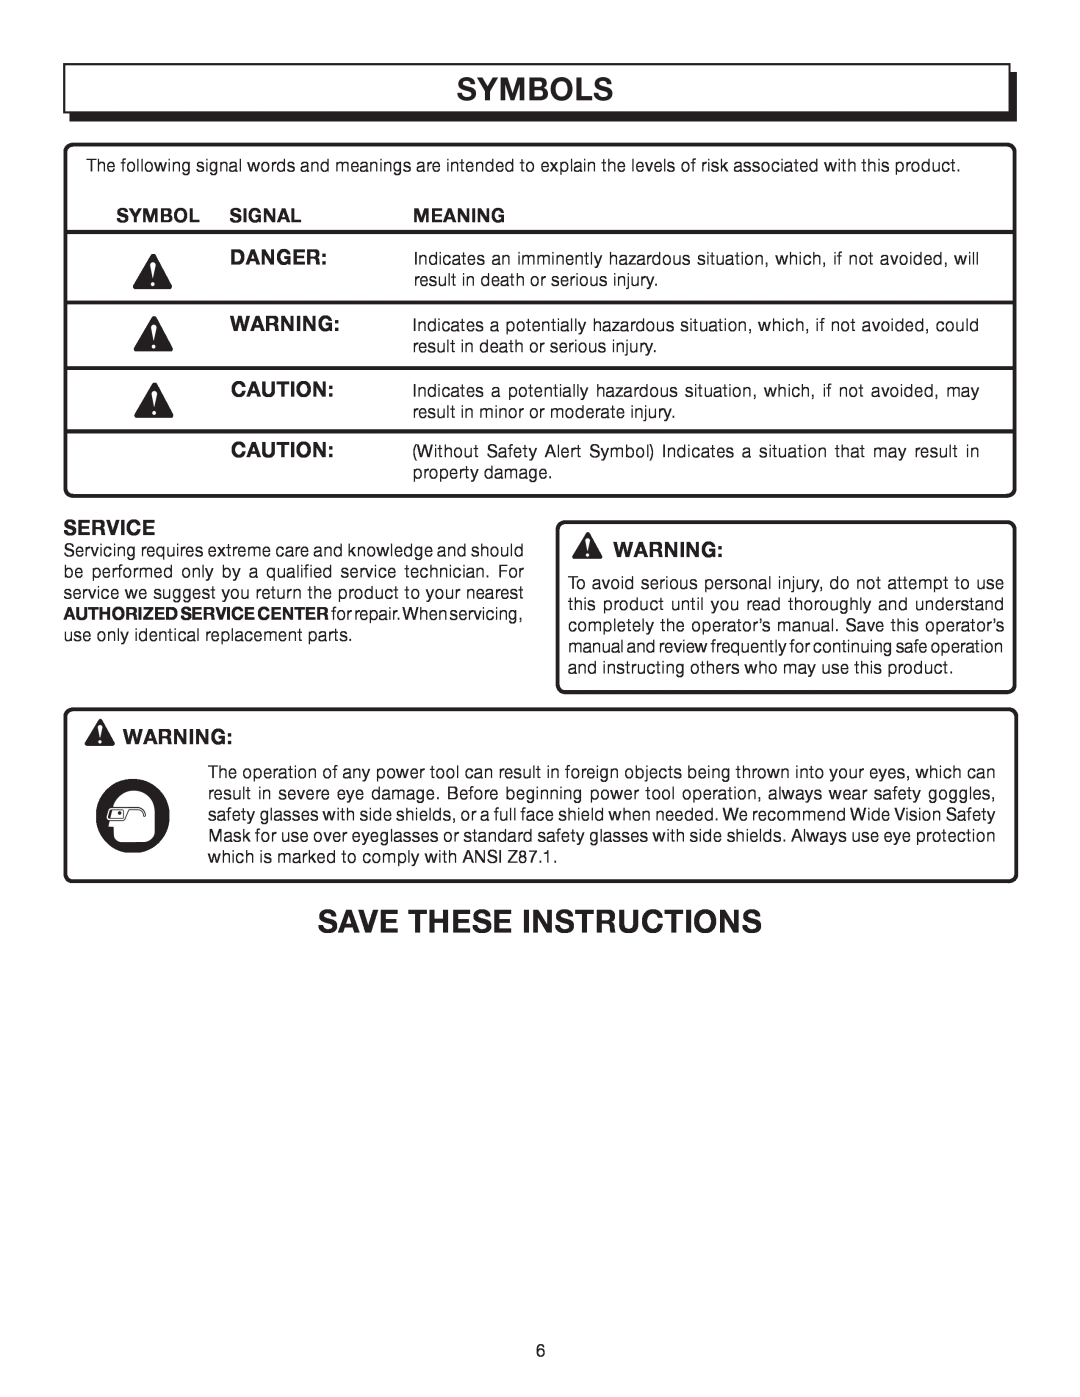 Homelite UT08542A manual Save These Instructions, Symbols, Service, Symbol Signal, Meaning 